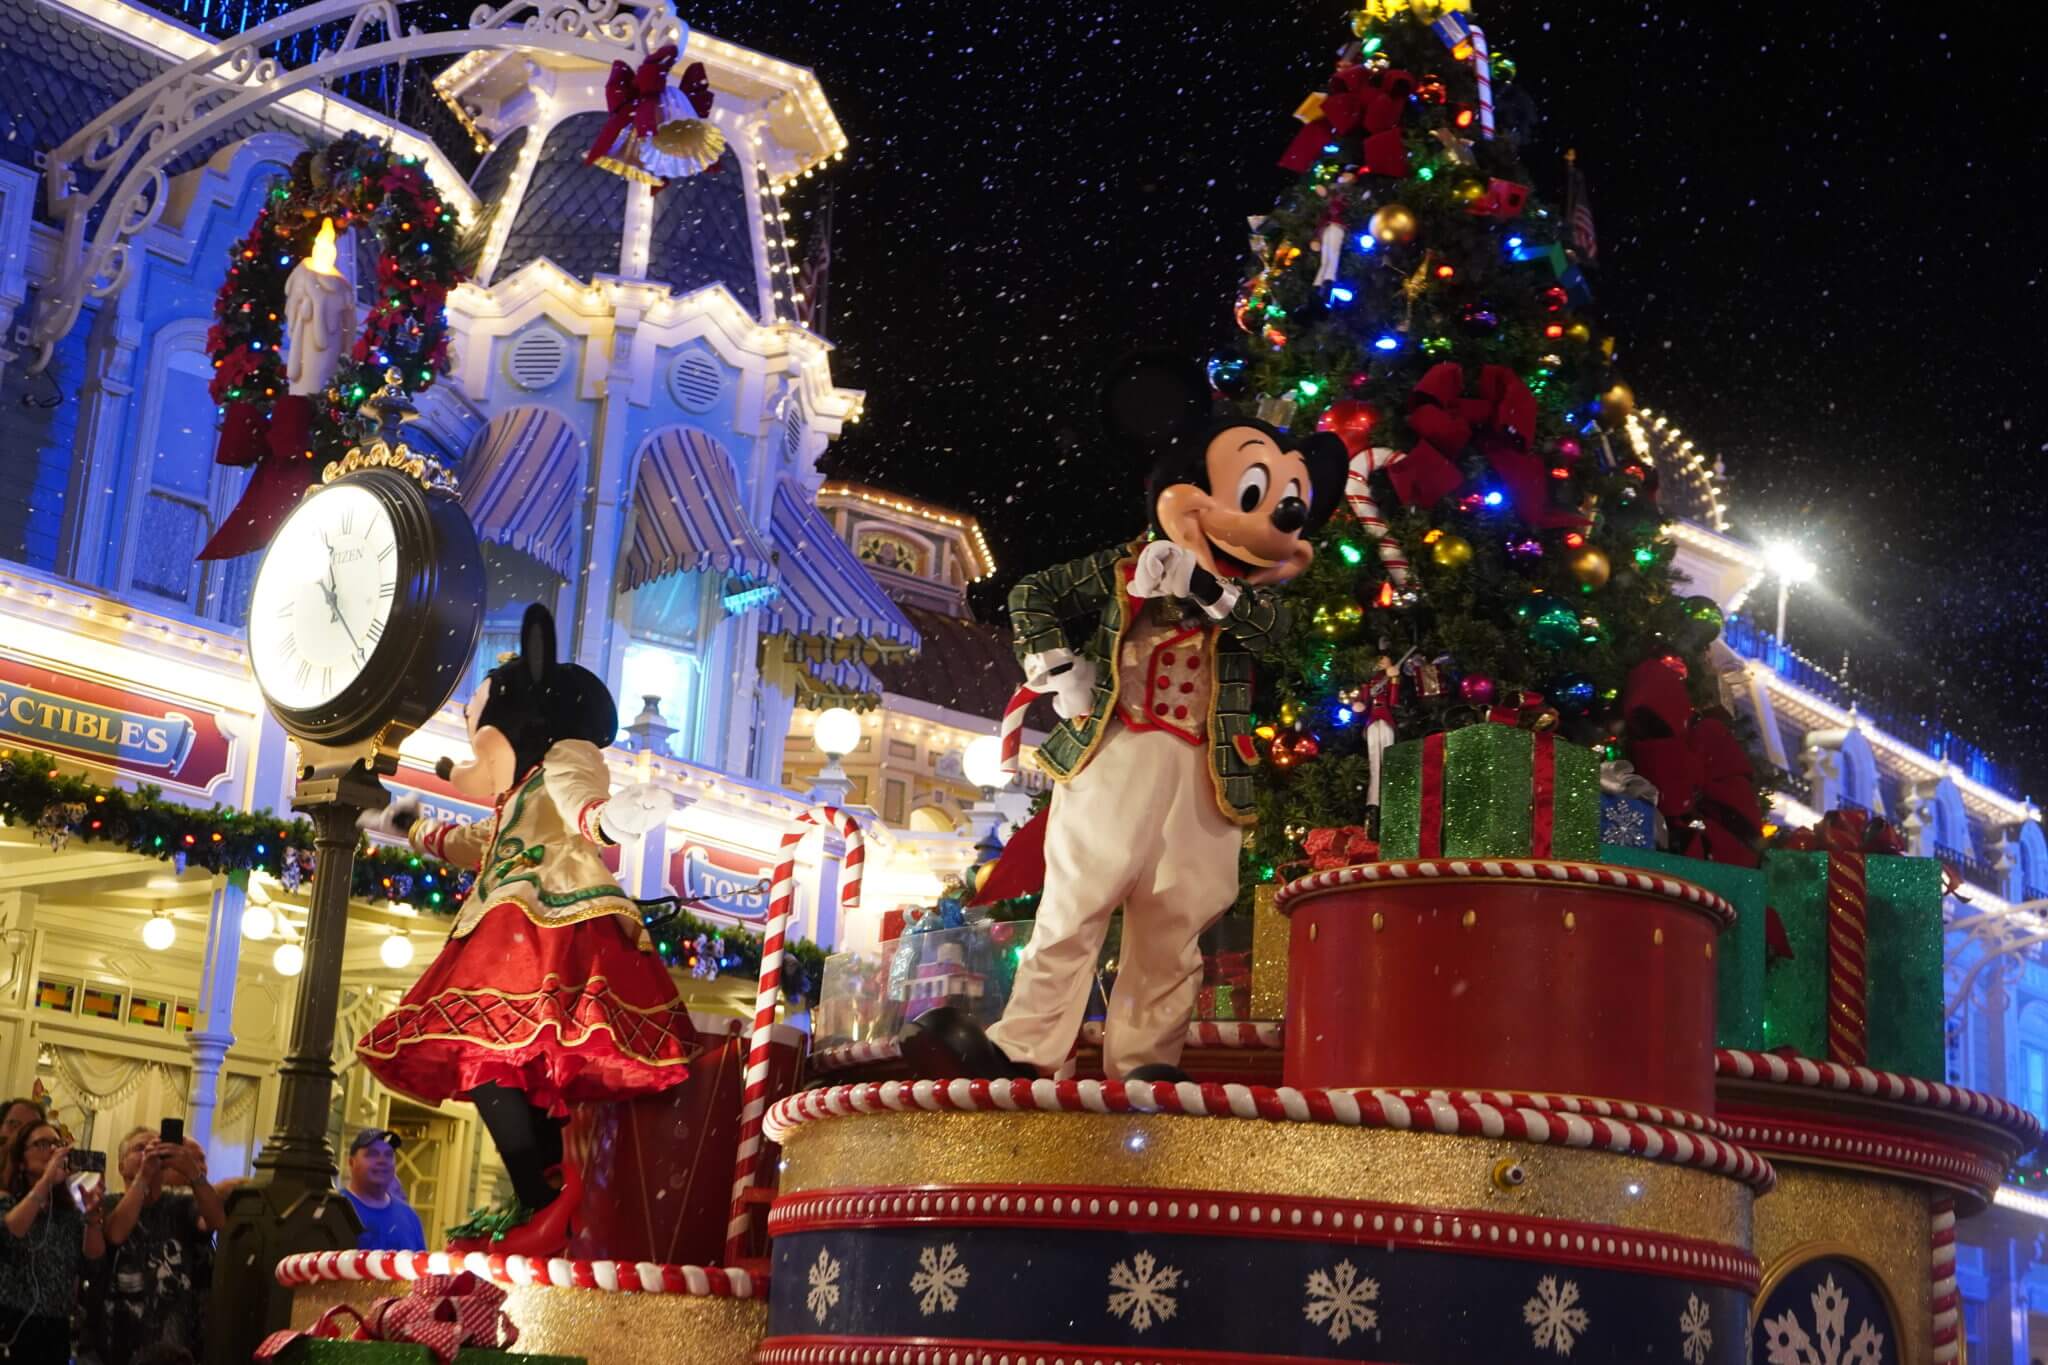 Mickey and Minnie Snow and Christmas Tree and Mickey Wreath on Main Street USA in Disney World